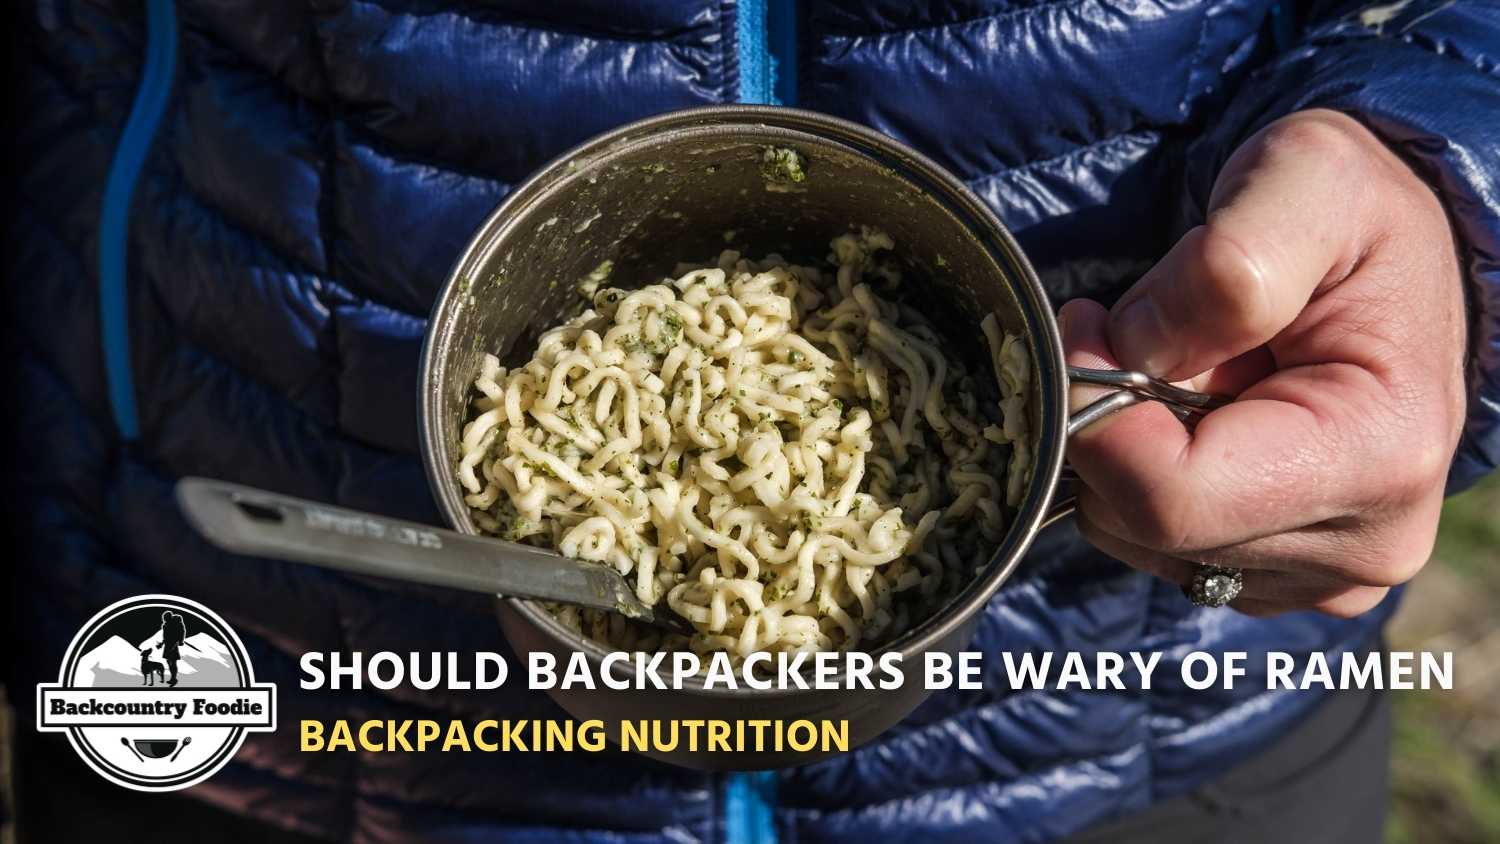 Backcountry Foodie Blog Should Backpackers Be Wary of Ramen Noodles Backpacking Nutrition